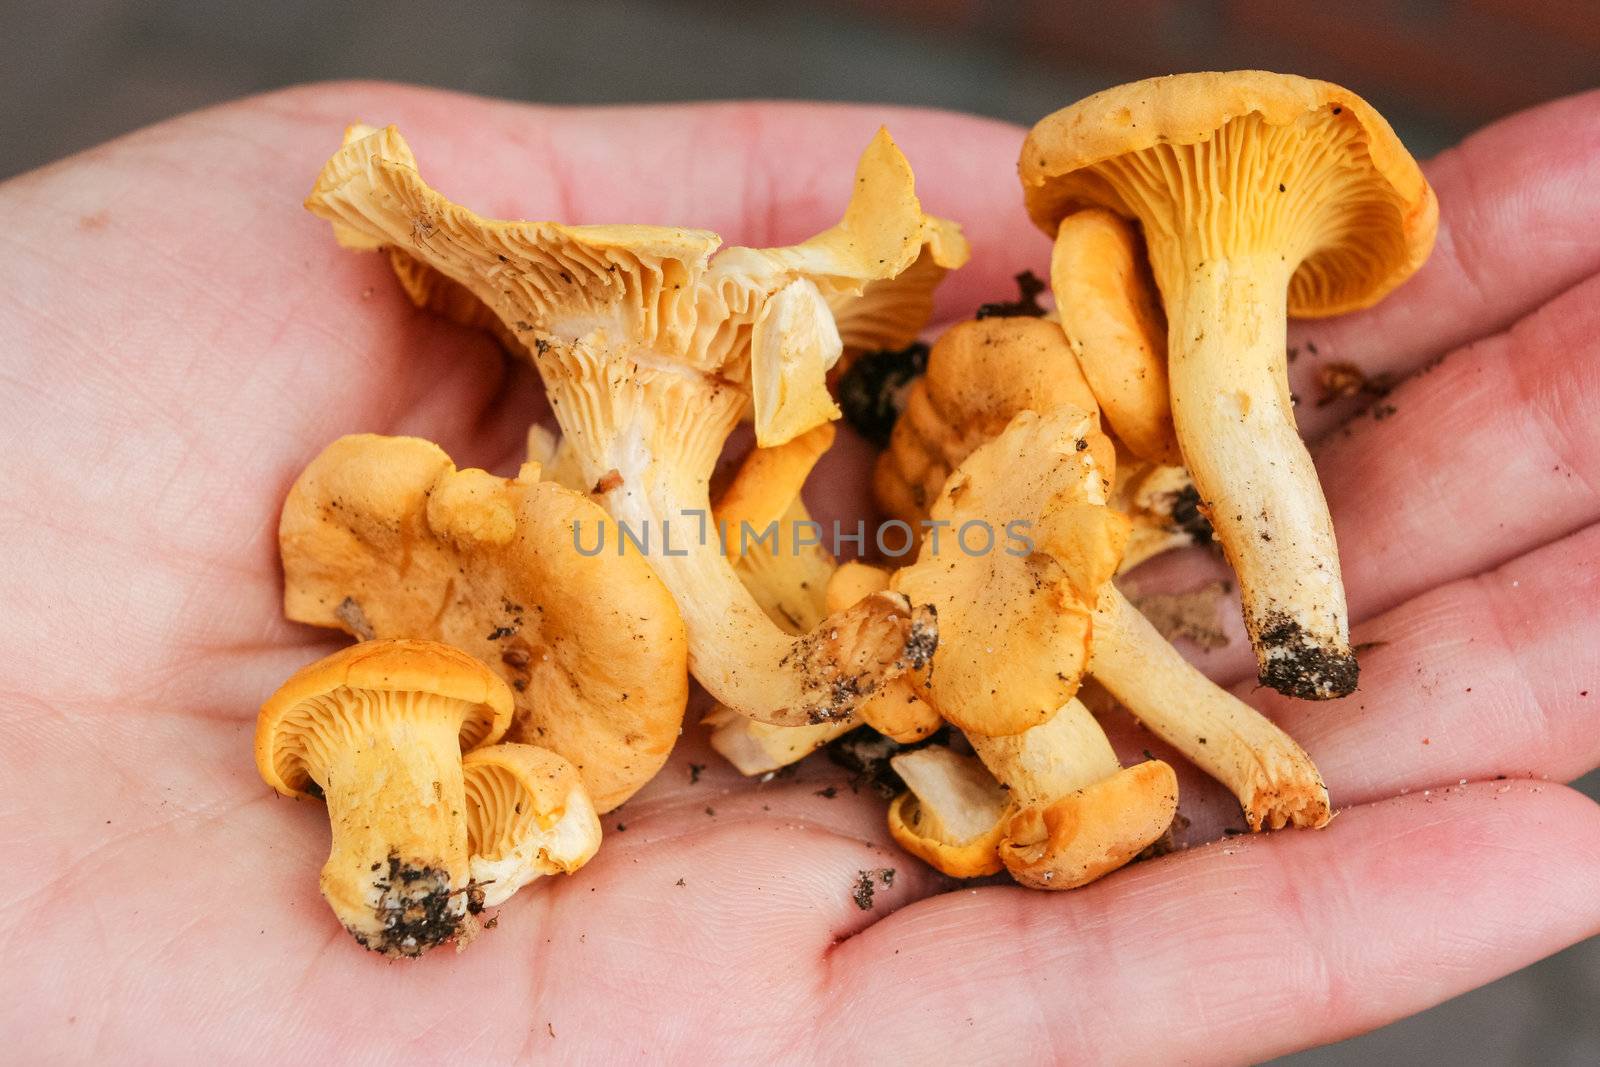 Freshly picked wild chanterelles held out in hand.